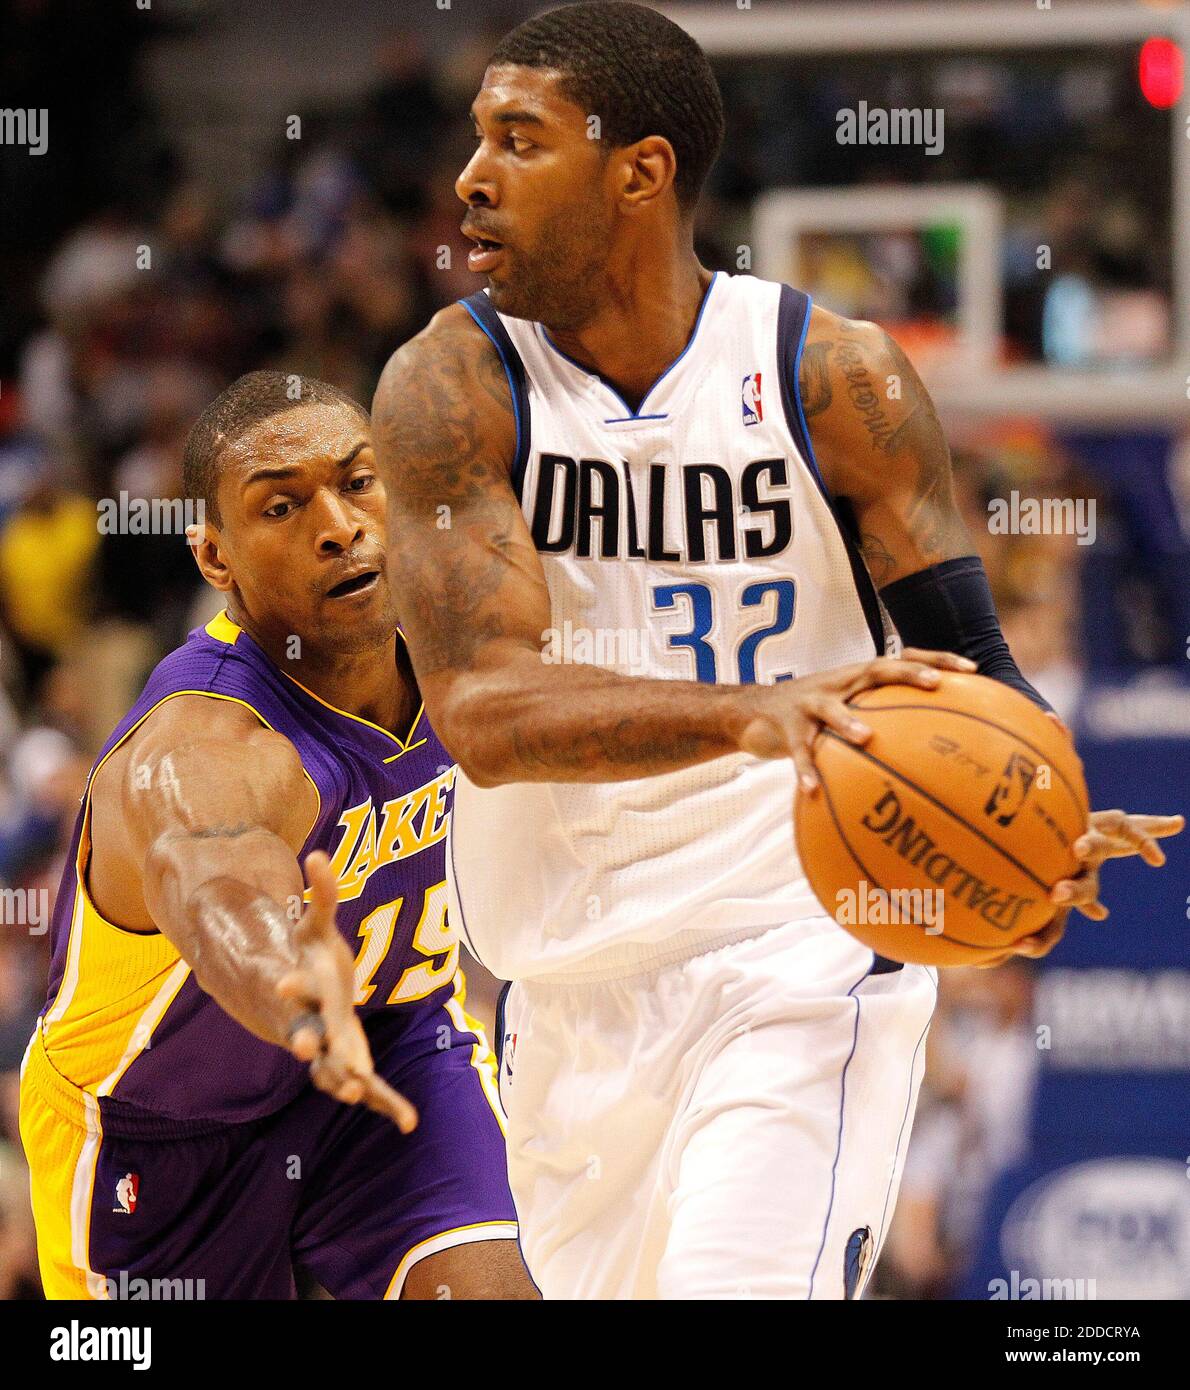 NO FILM, NO VIDEO, NO TV, NO DOCUMENTARY - Los Angeles Lakers small forward Metta World Peace (15) pressures Dallas Mavericks shooting guard O.J. Mayo (32) in the first half at the American Airlines Center in Dallas, TX, USA on November 24, 2012. Photo by Ron Jenkins/Fort Worth Star-Telegram/MCT/ABACAPRESS.COM Stock Photo